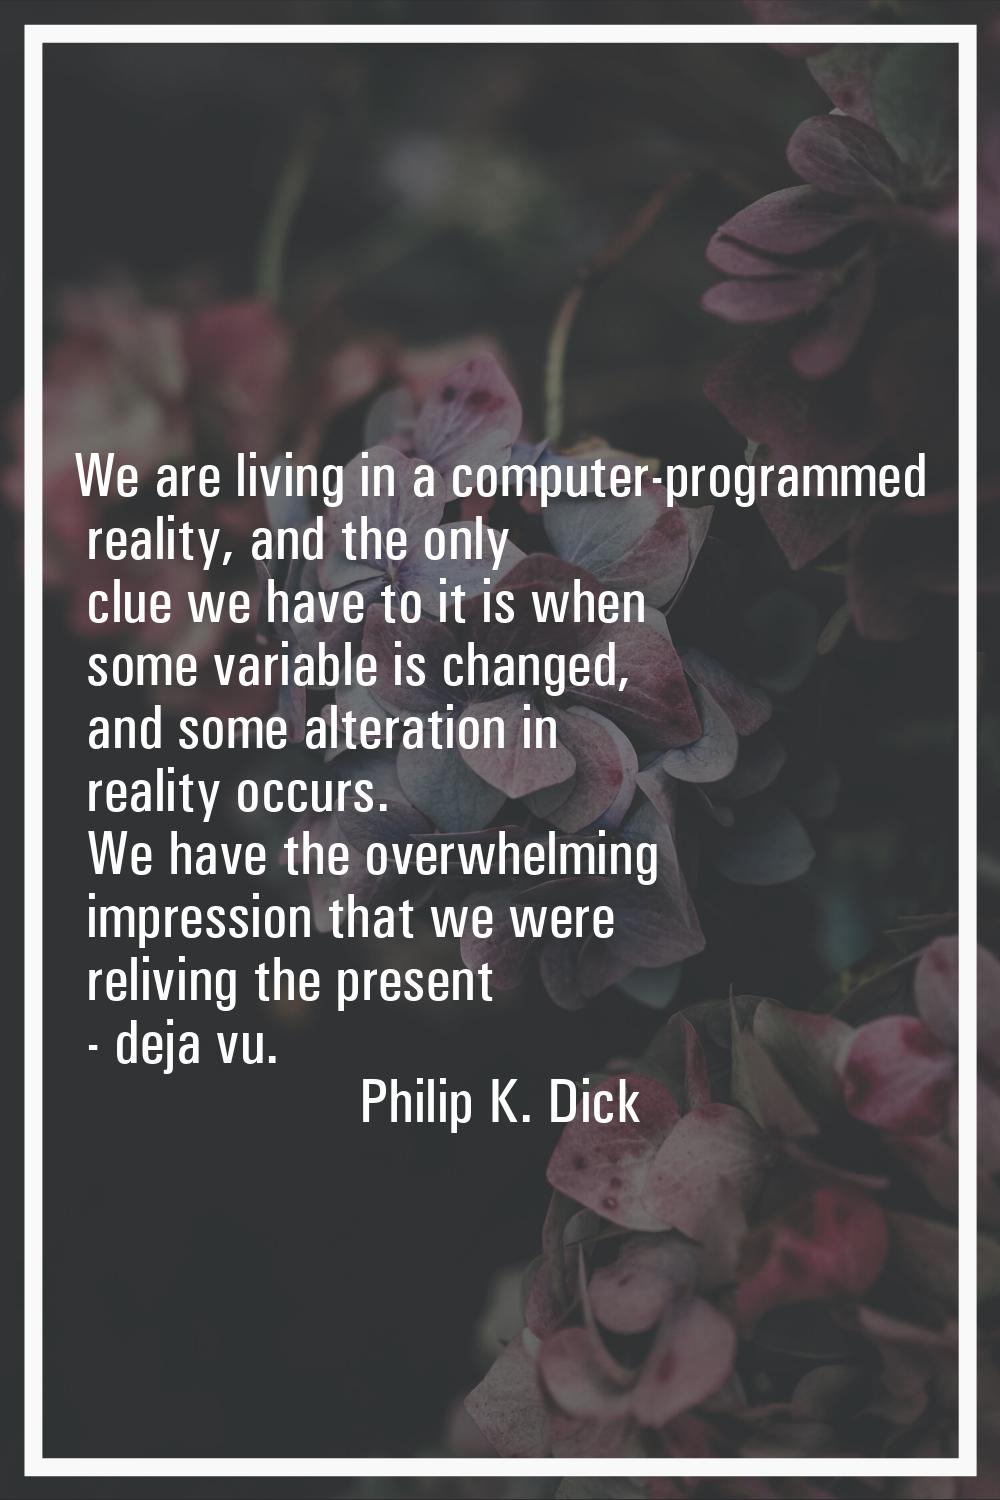 We are living in a computer-programmed reality, and the only clue we have to it is when some variab